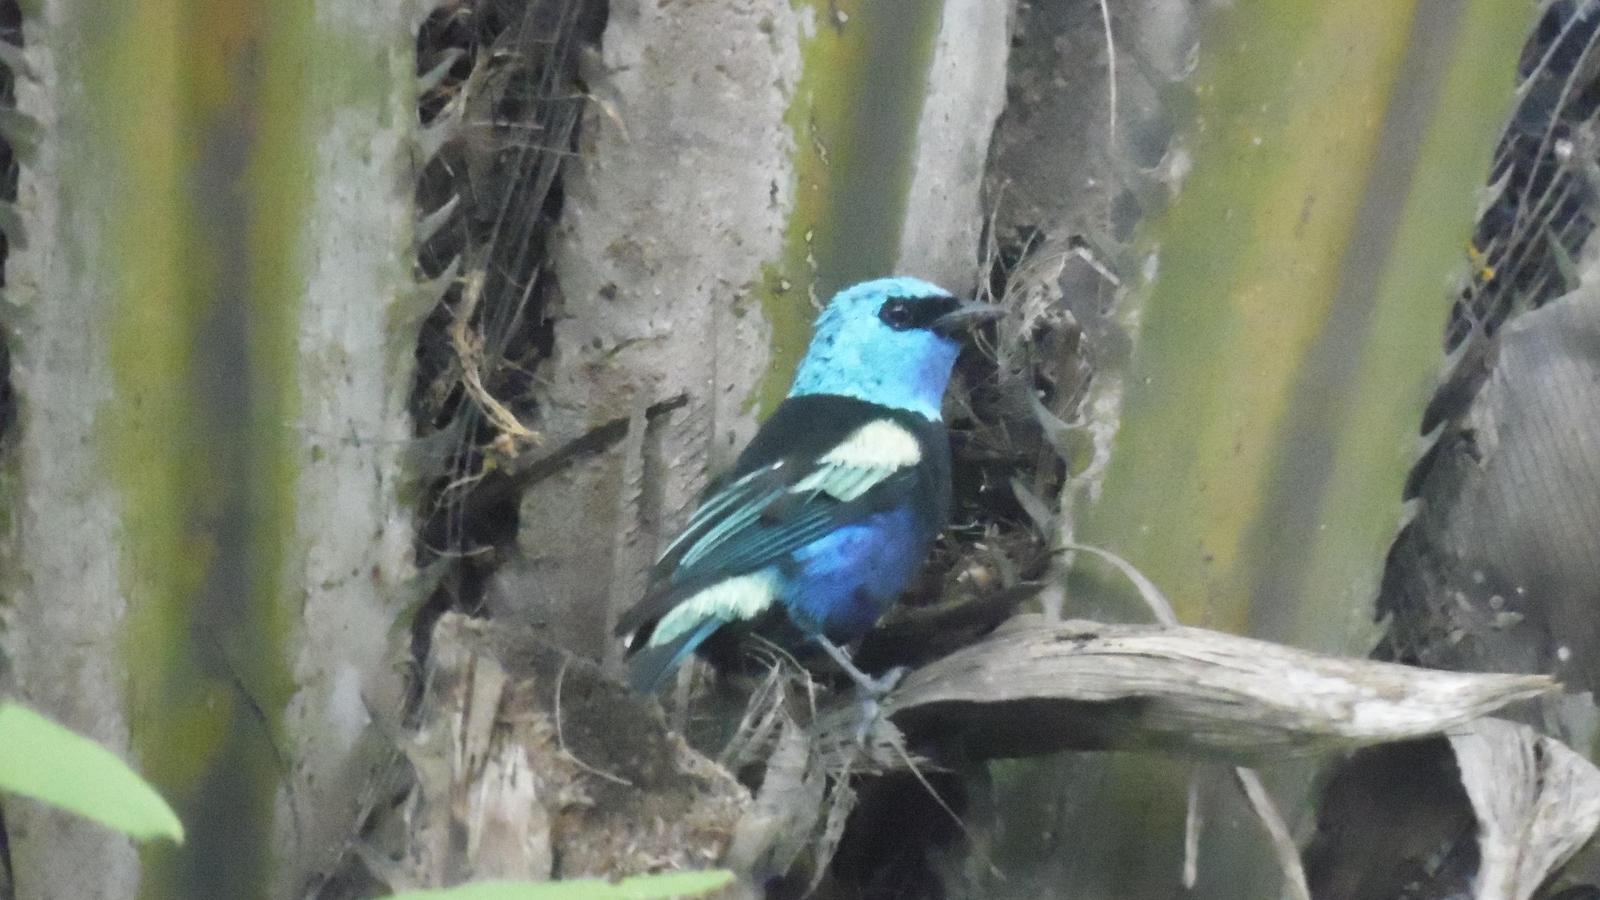 Blue-necked Tanager Photo by Julio Delgado